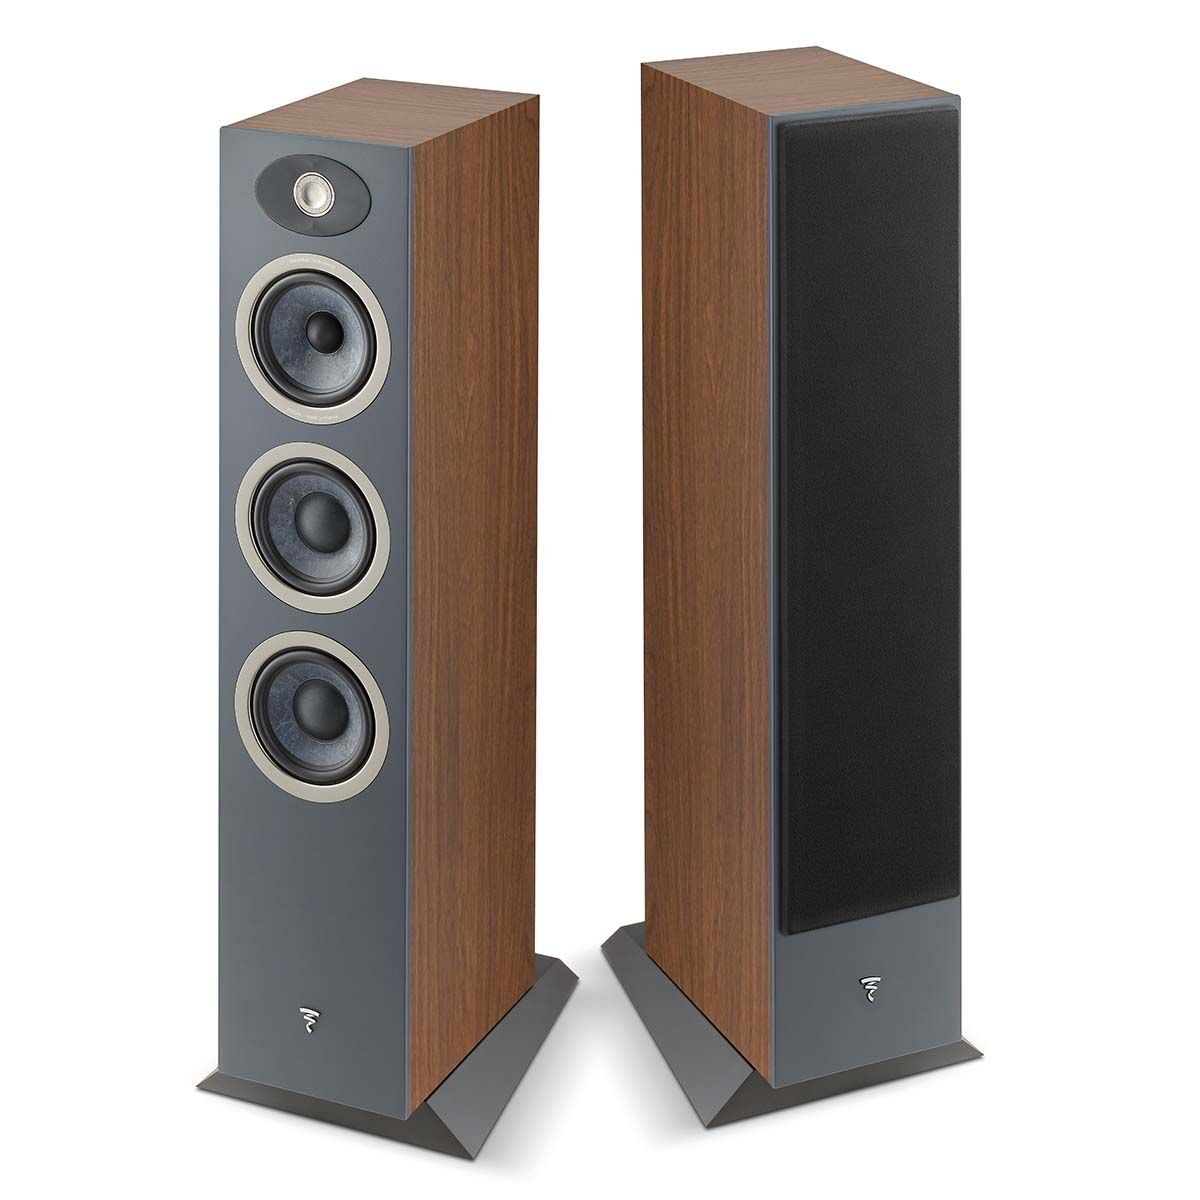 Focal Theva No2 Floorstanding Speaker - Each - view of dark wood pair, one with grille, one without grille